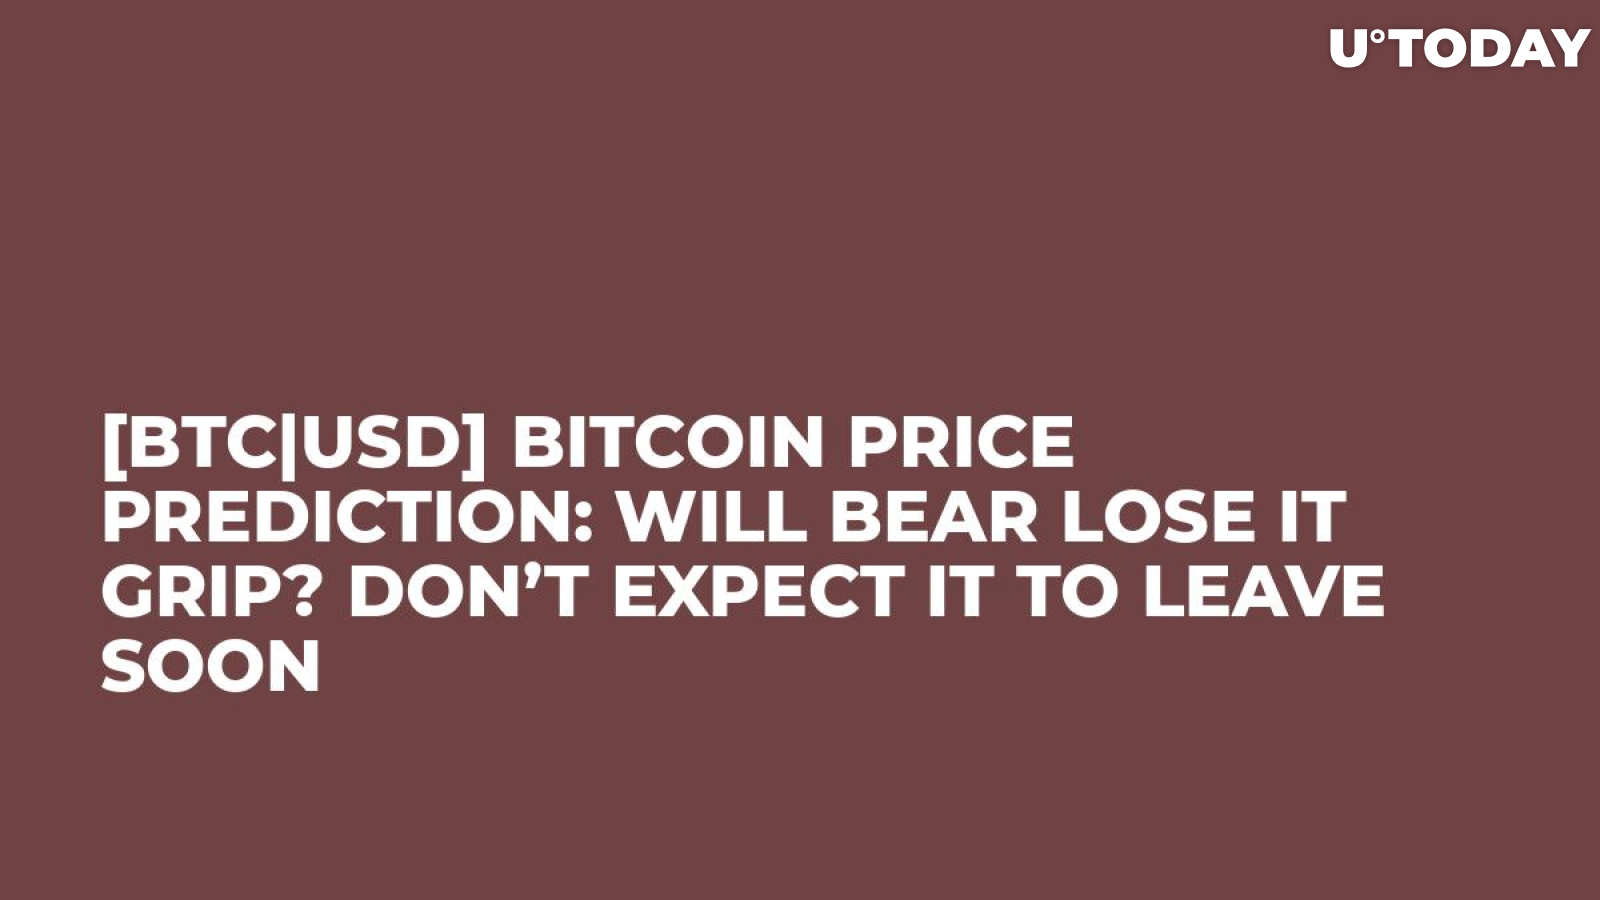 [BTC|USD] Bitcoin Price Prediction: Will Bear Lose It Grip? Don’t Expect It To Leave Soon